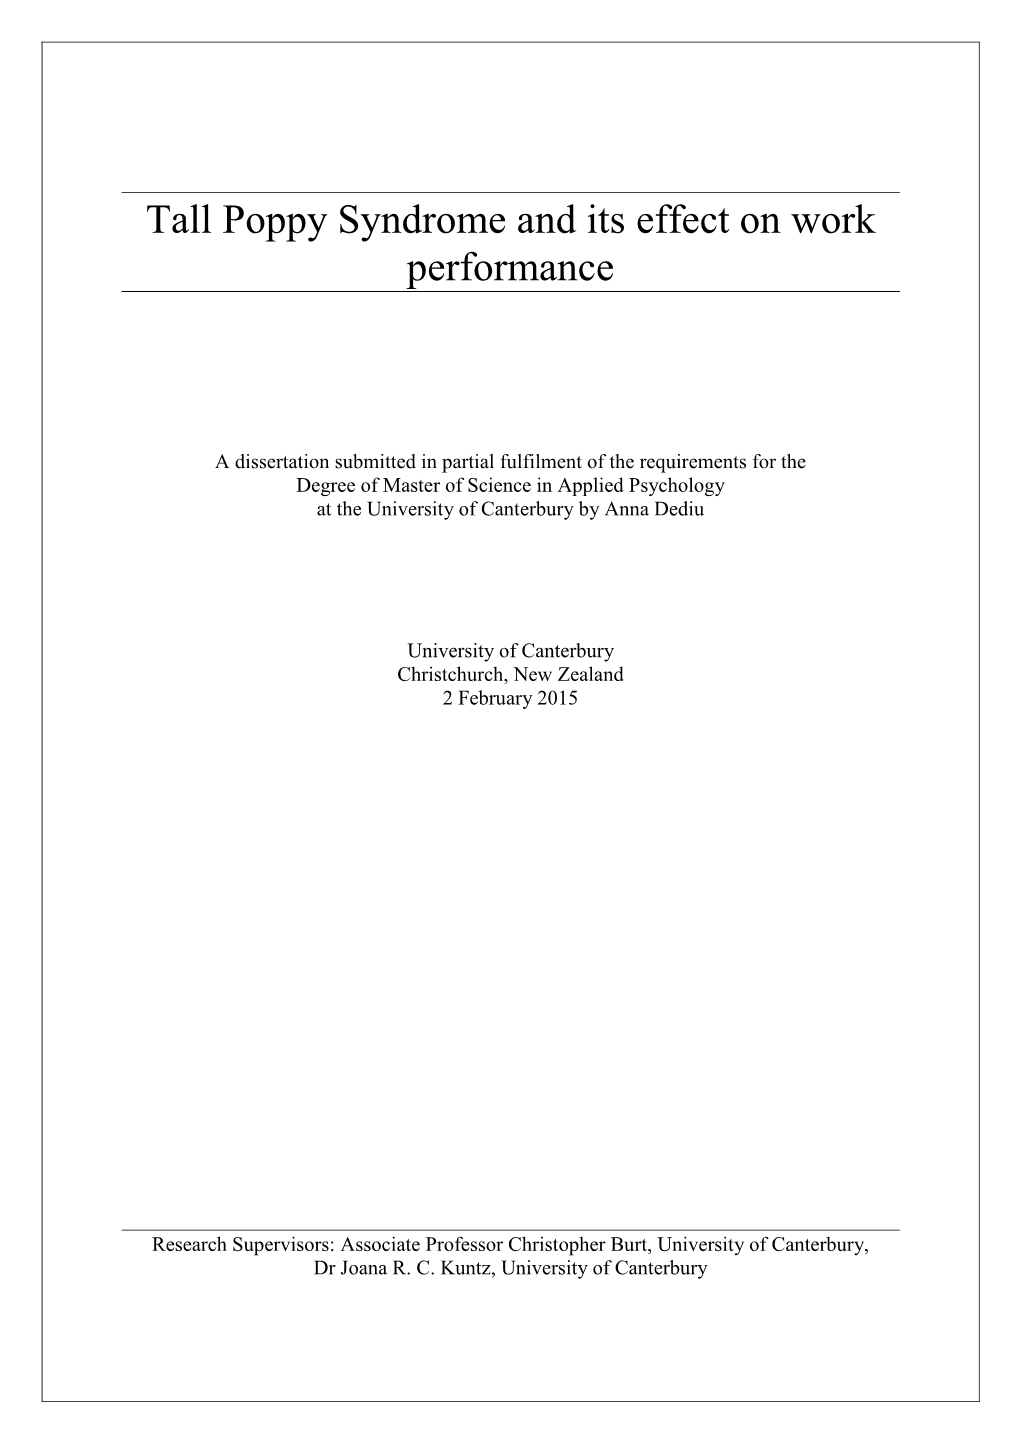 Tall Poppy Syndrome and Its Effect on Work Performance